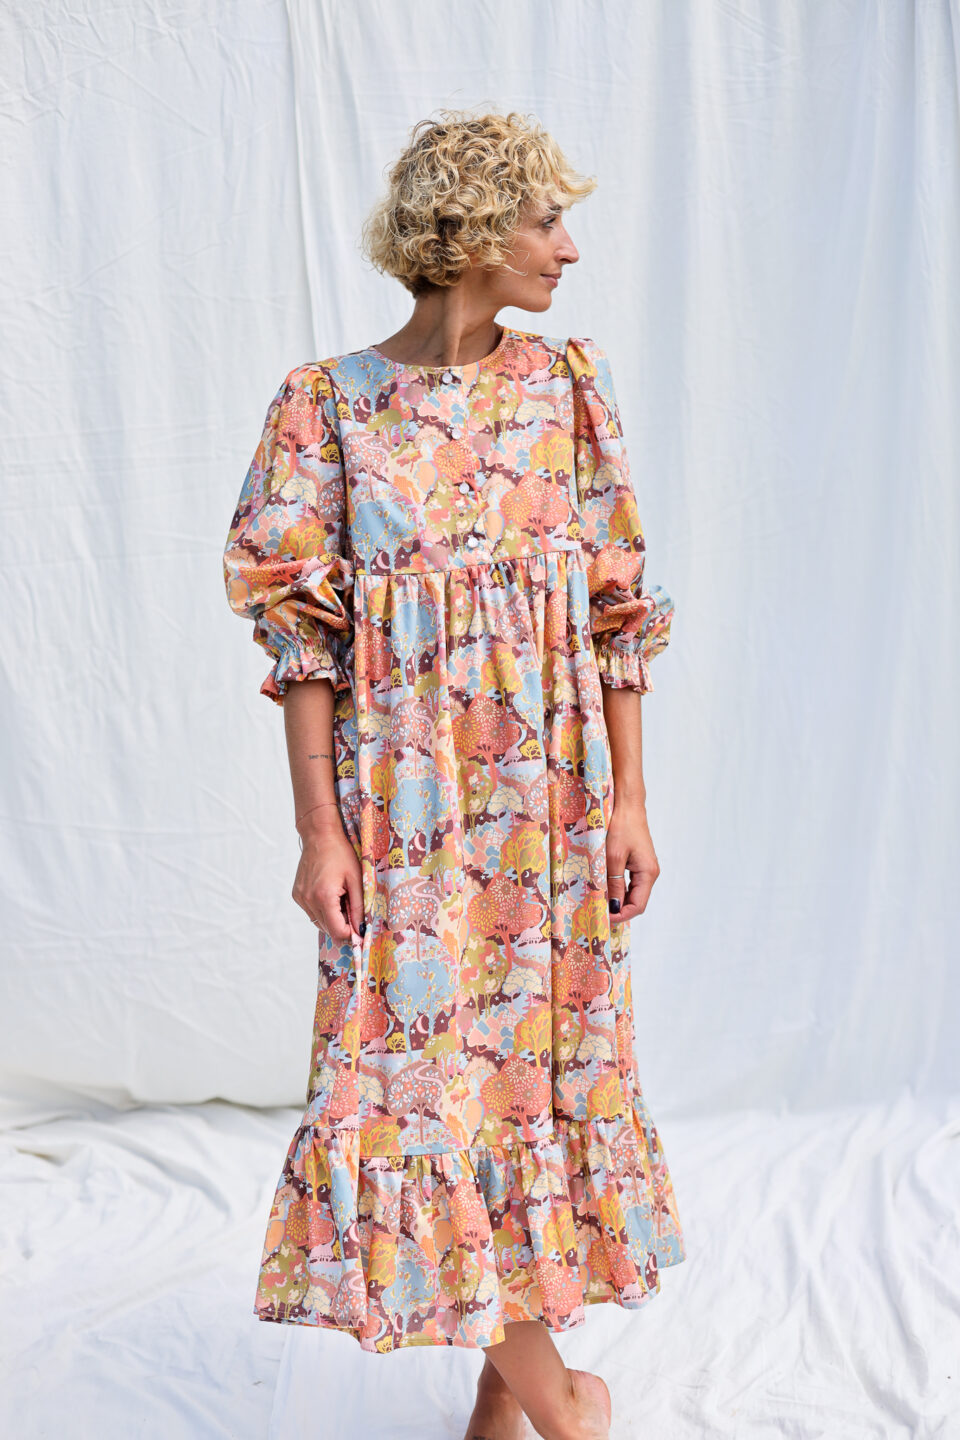 Floral high waisted long sleeve dress ARBORETUM VALLEY | Dress | Sustainable clothing | OffOn clothing